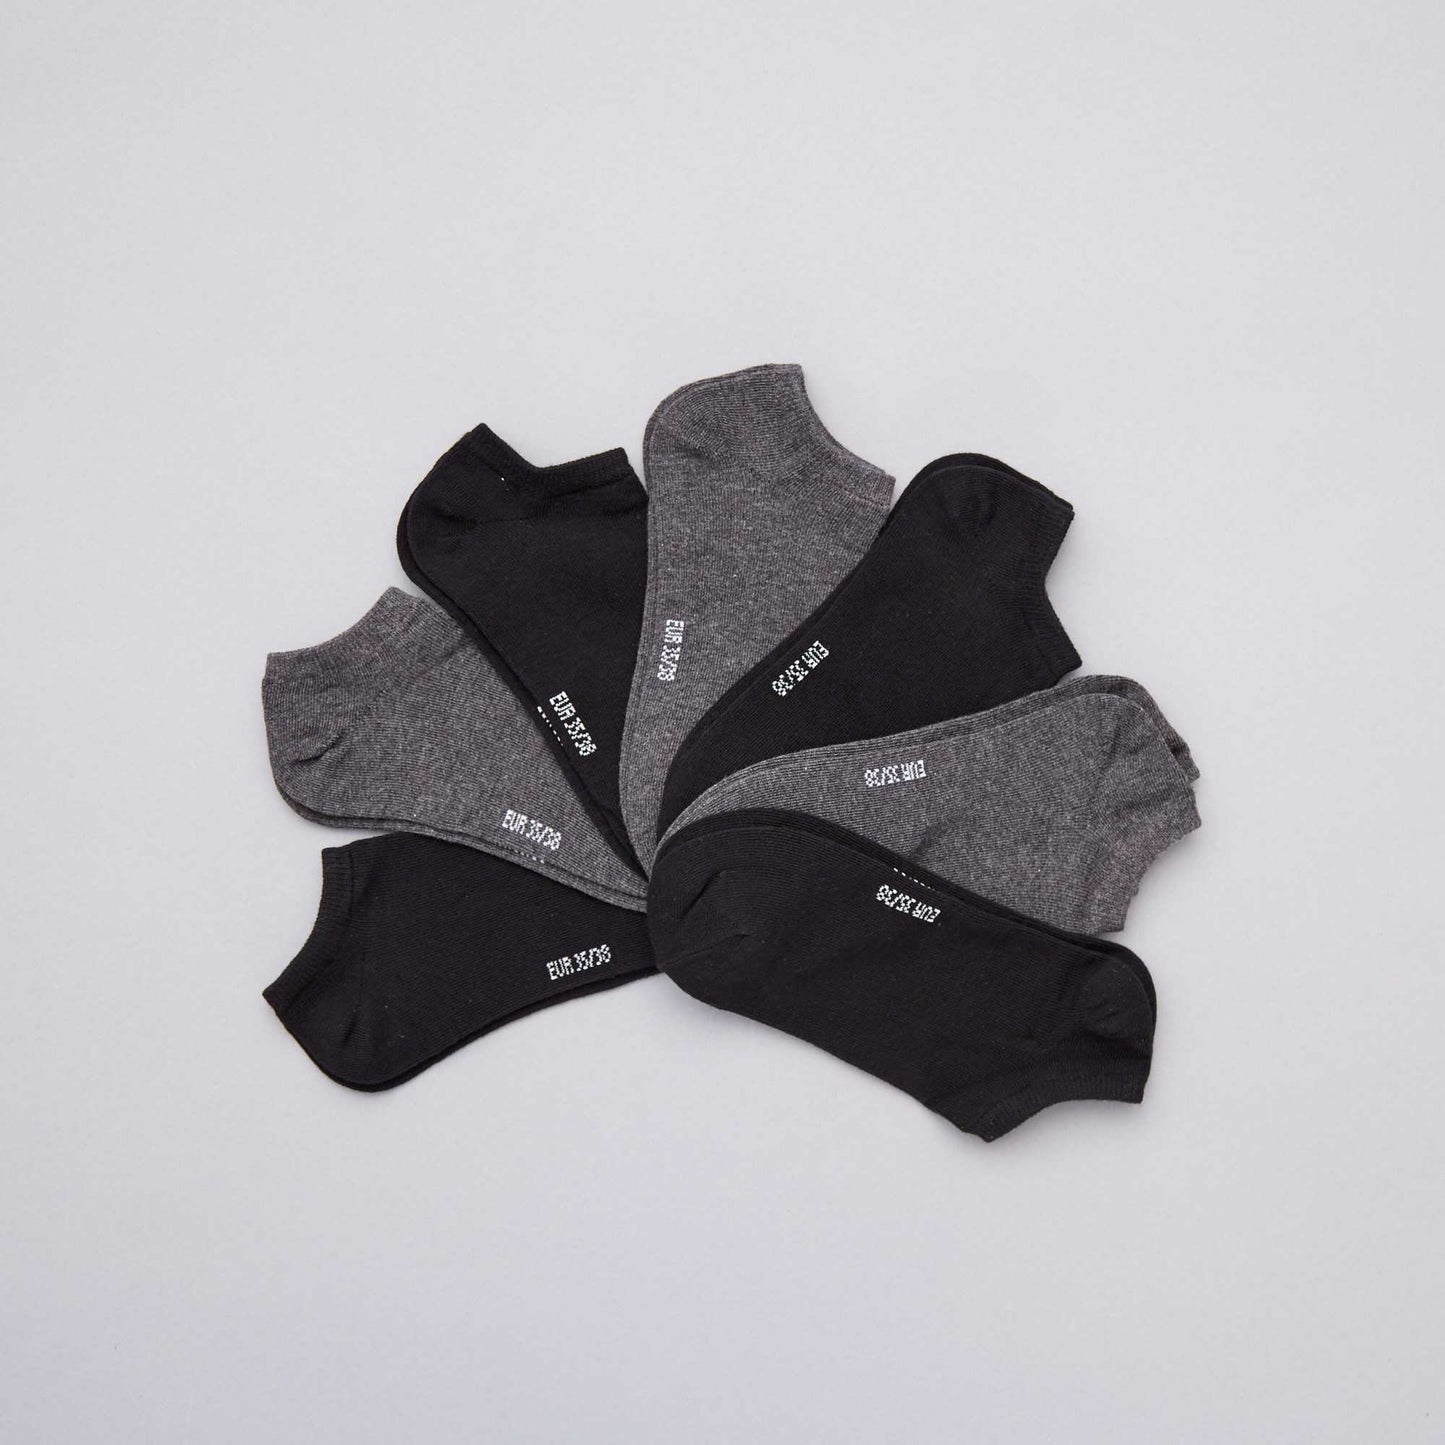 Pack of 7 pairs of trainer socks GREY